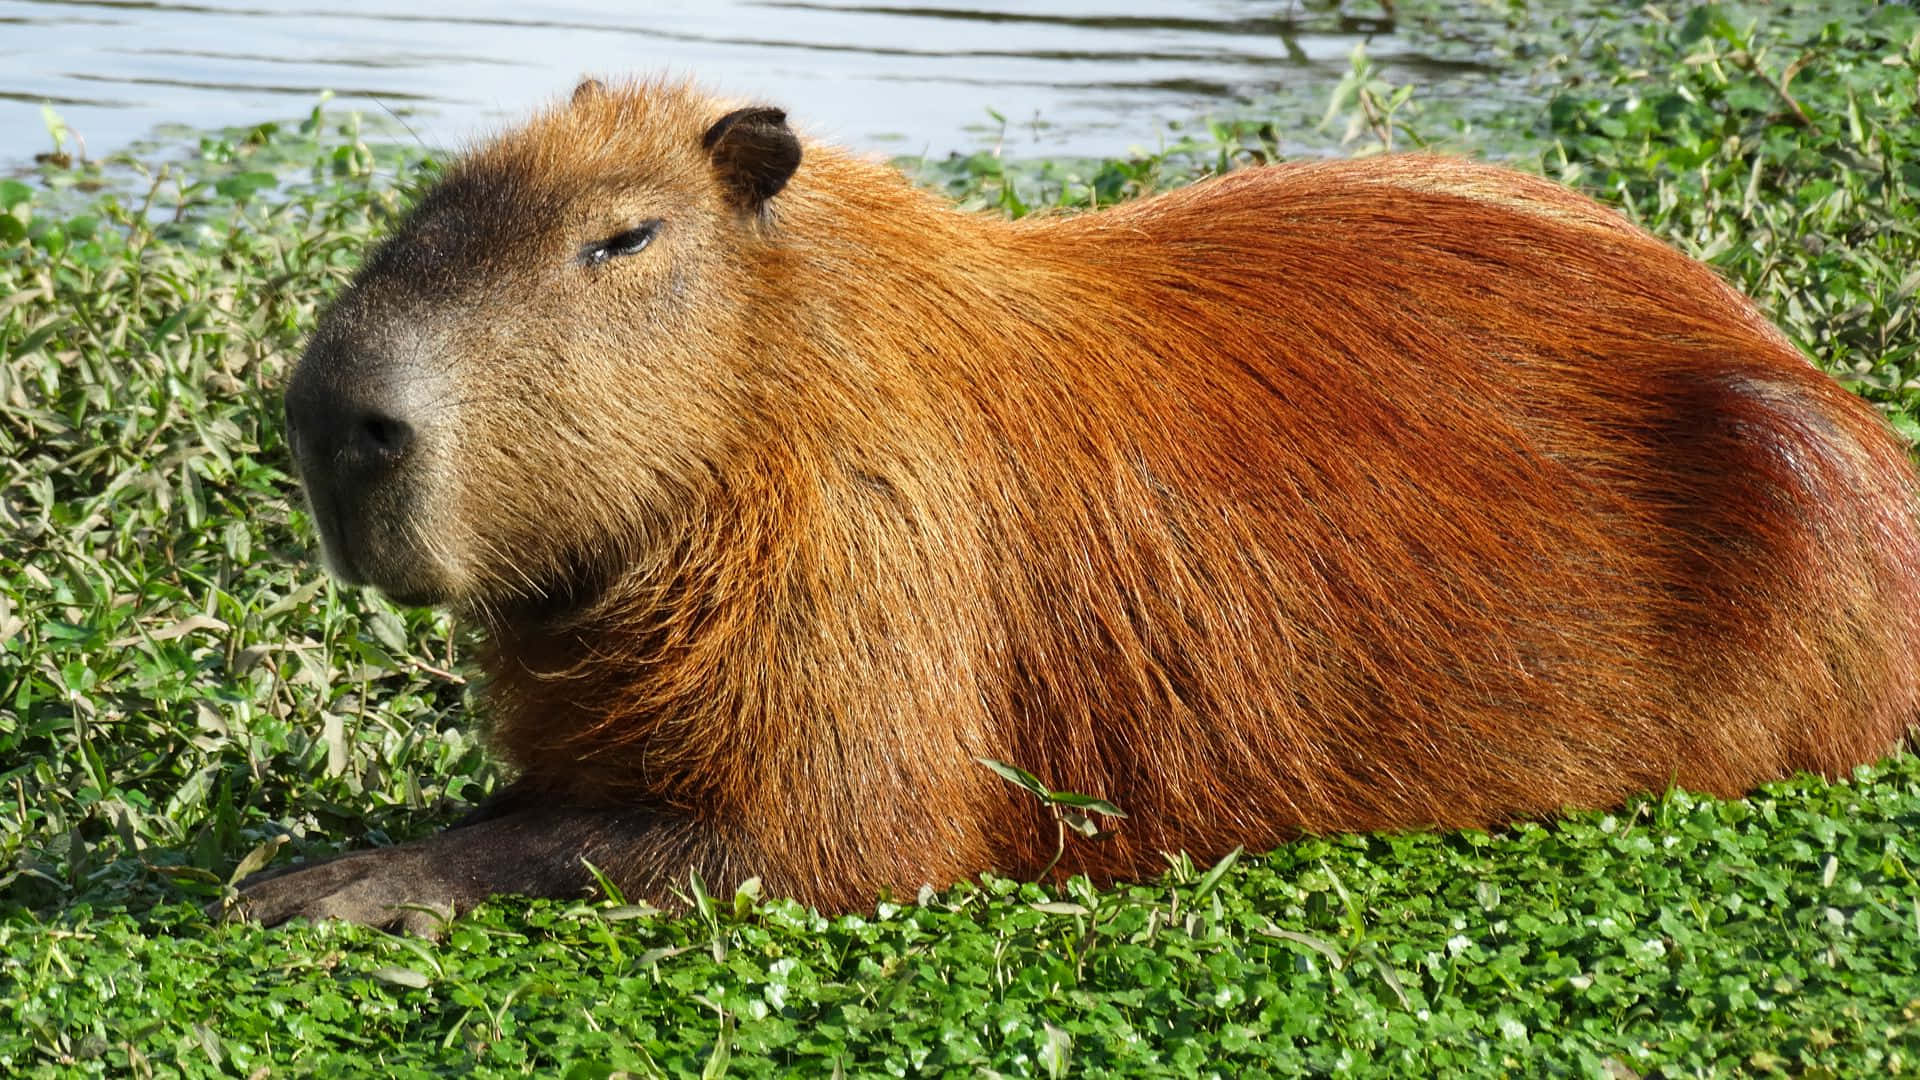 A herd of Capybaras taking a nap in the sun